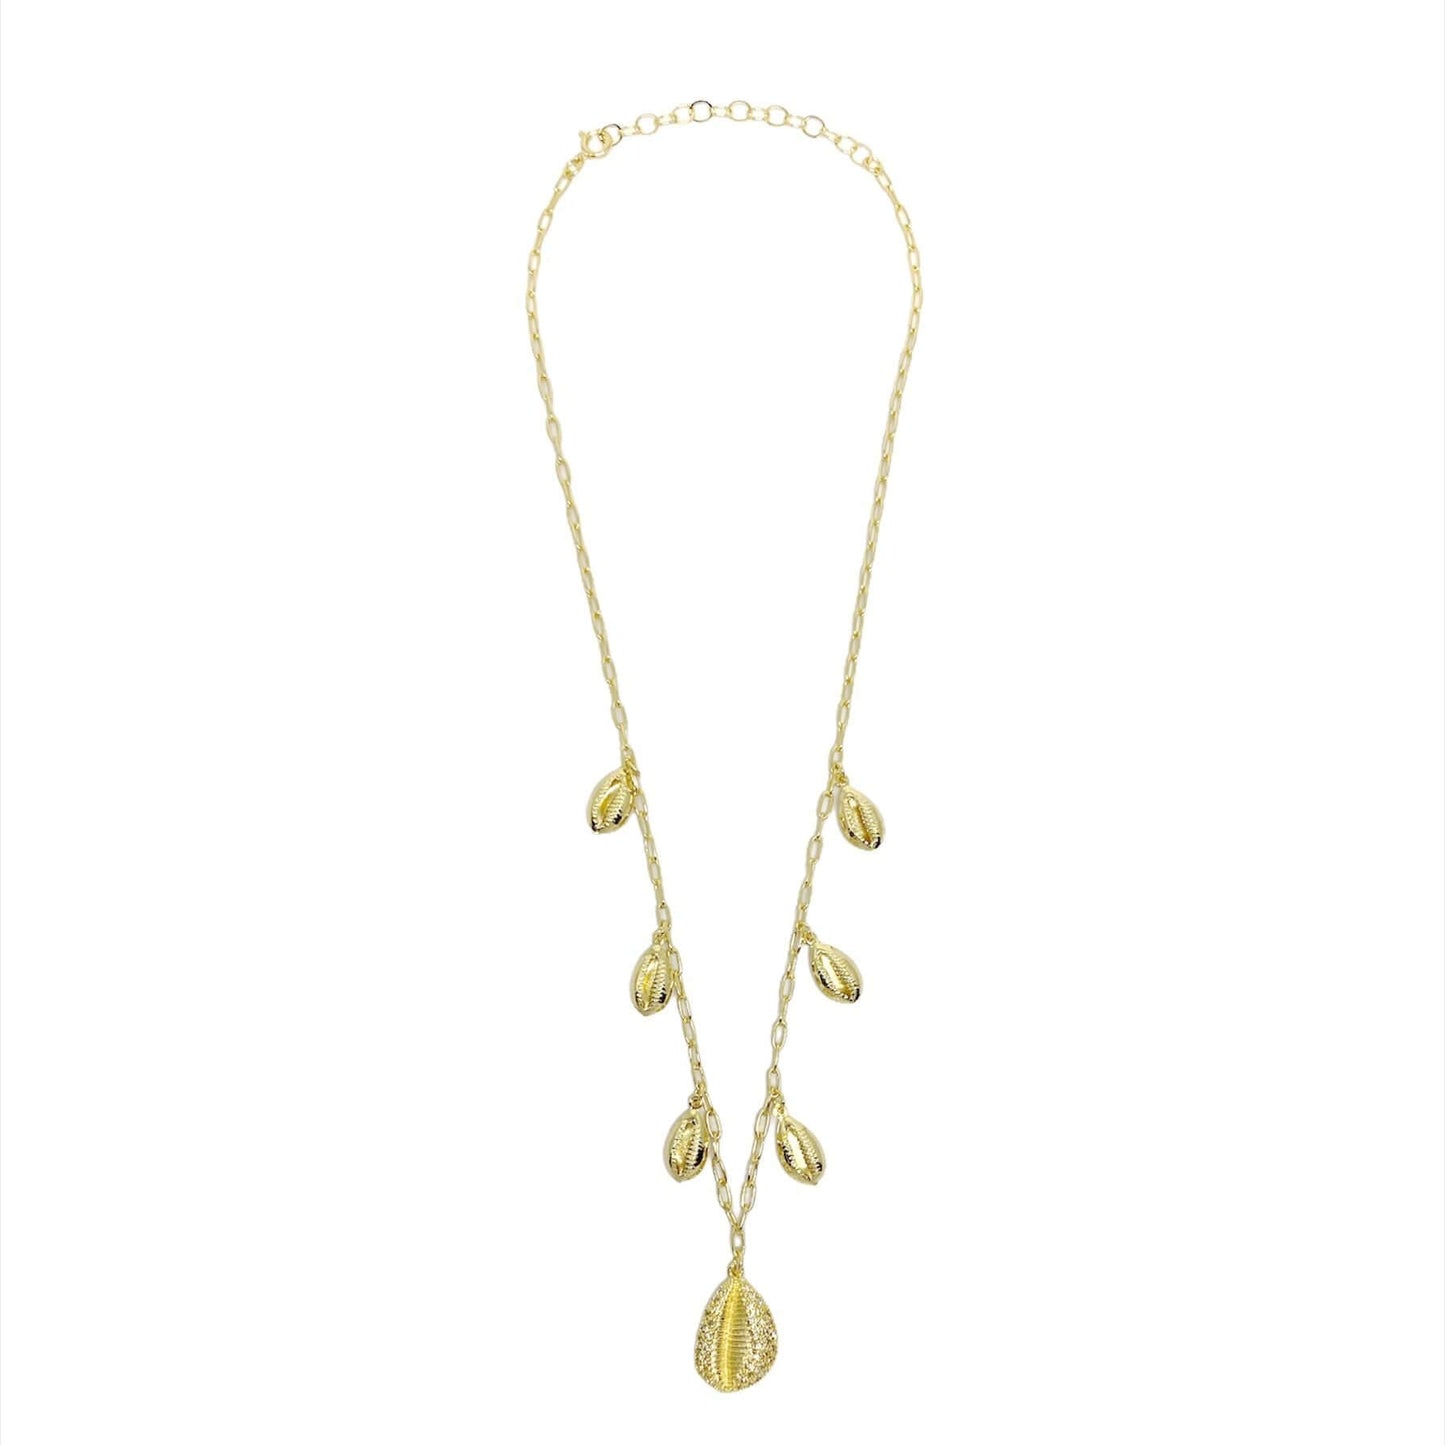 GoldFi 18k Gold Filled Cowrie Shell Necklace Featuring Cowrie Pendant and Charms